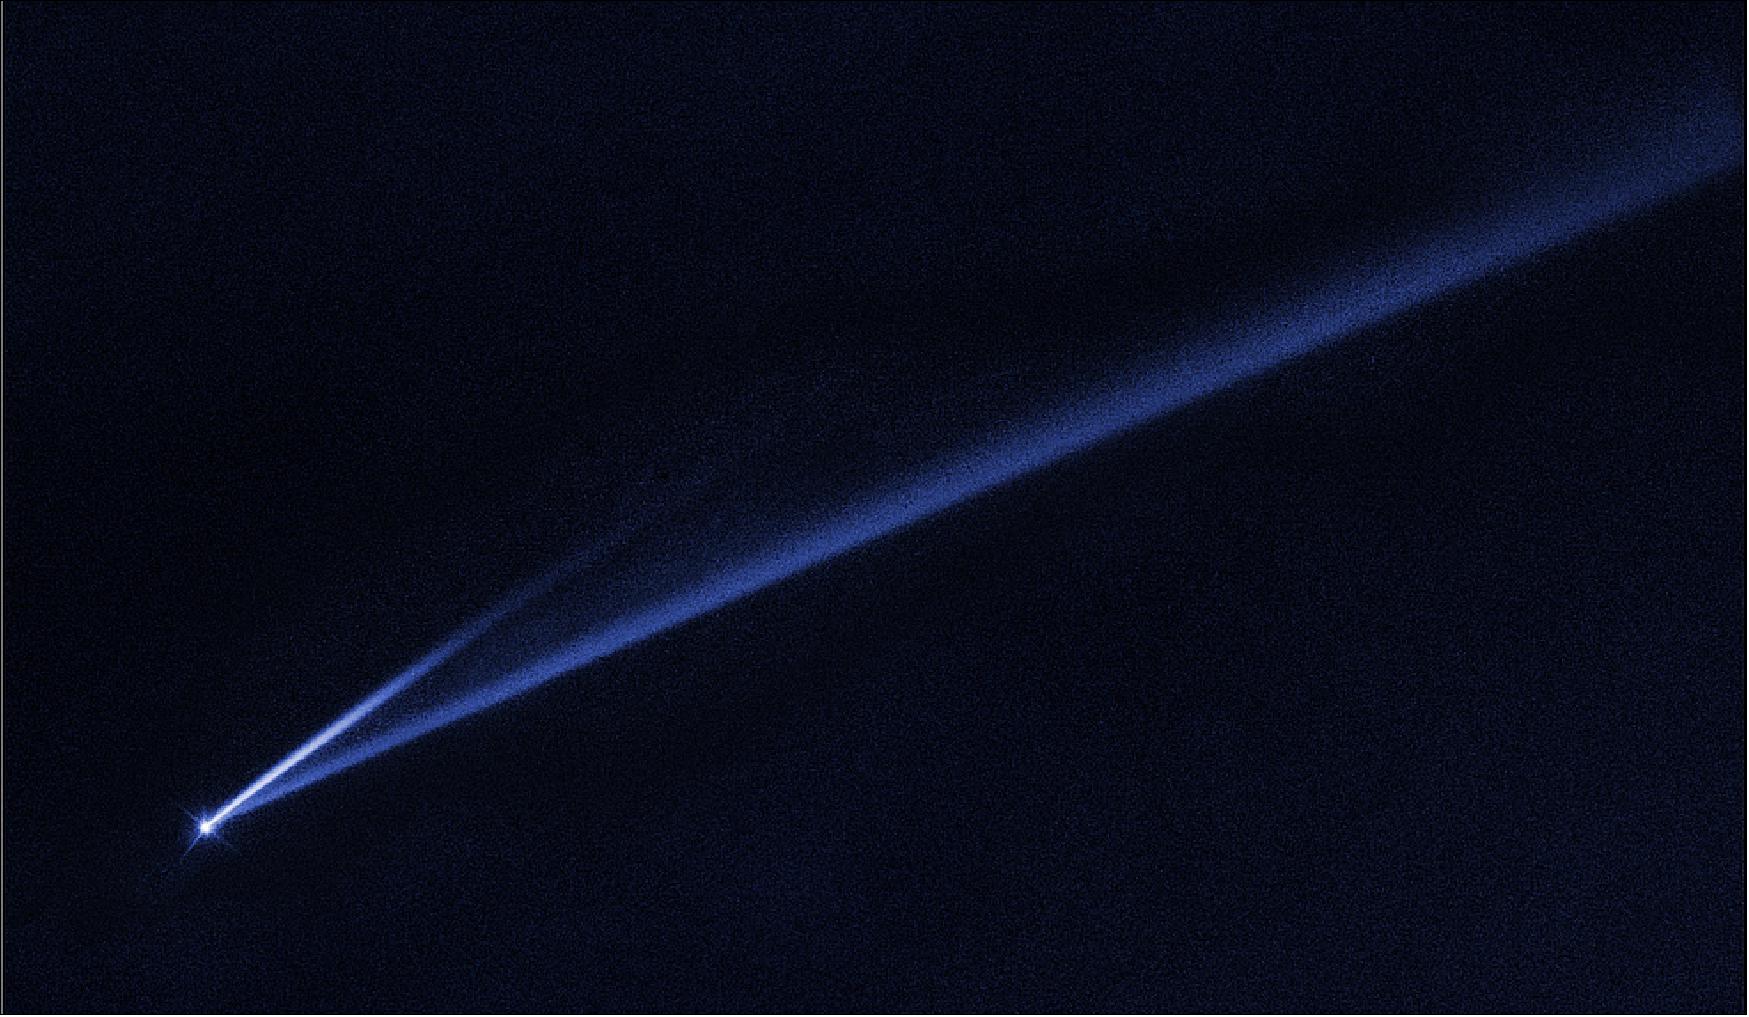 Figure 64: This Hubble Space Telescope image reveals the gradual self-destruction of an asteroid, whose ejected dusty material has formed two long, thin, comet-like tails. The longer tail stretches more than 500,000 miles (800,000 km) and is roughly 3,000 miles (4,800 km) wide. The shorter tail is about a quarter as long. The streamers will eventually disperse into space [image credit: NASA, ESA, K. Meech and J. Kleyna (University of Hawaii), and O. Hainaut (European Southern Observatory)]